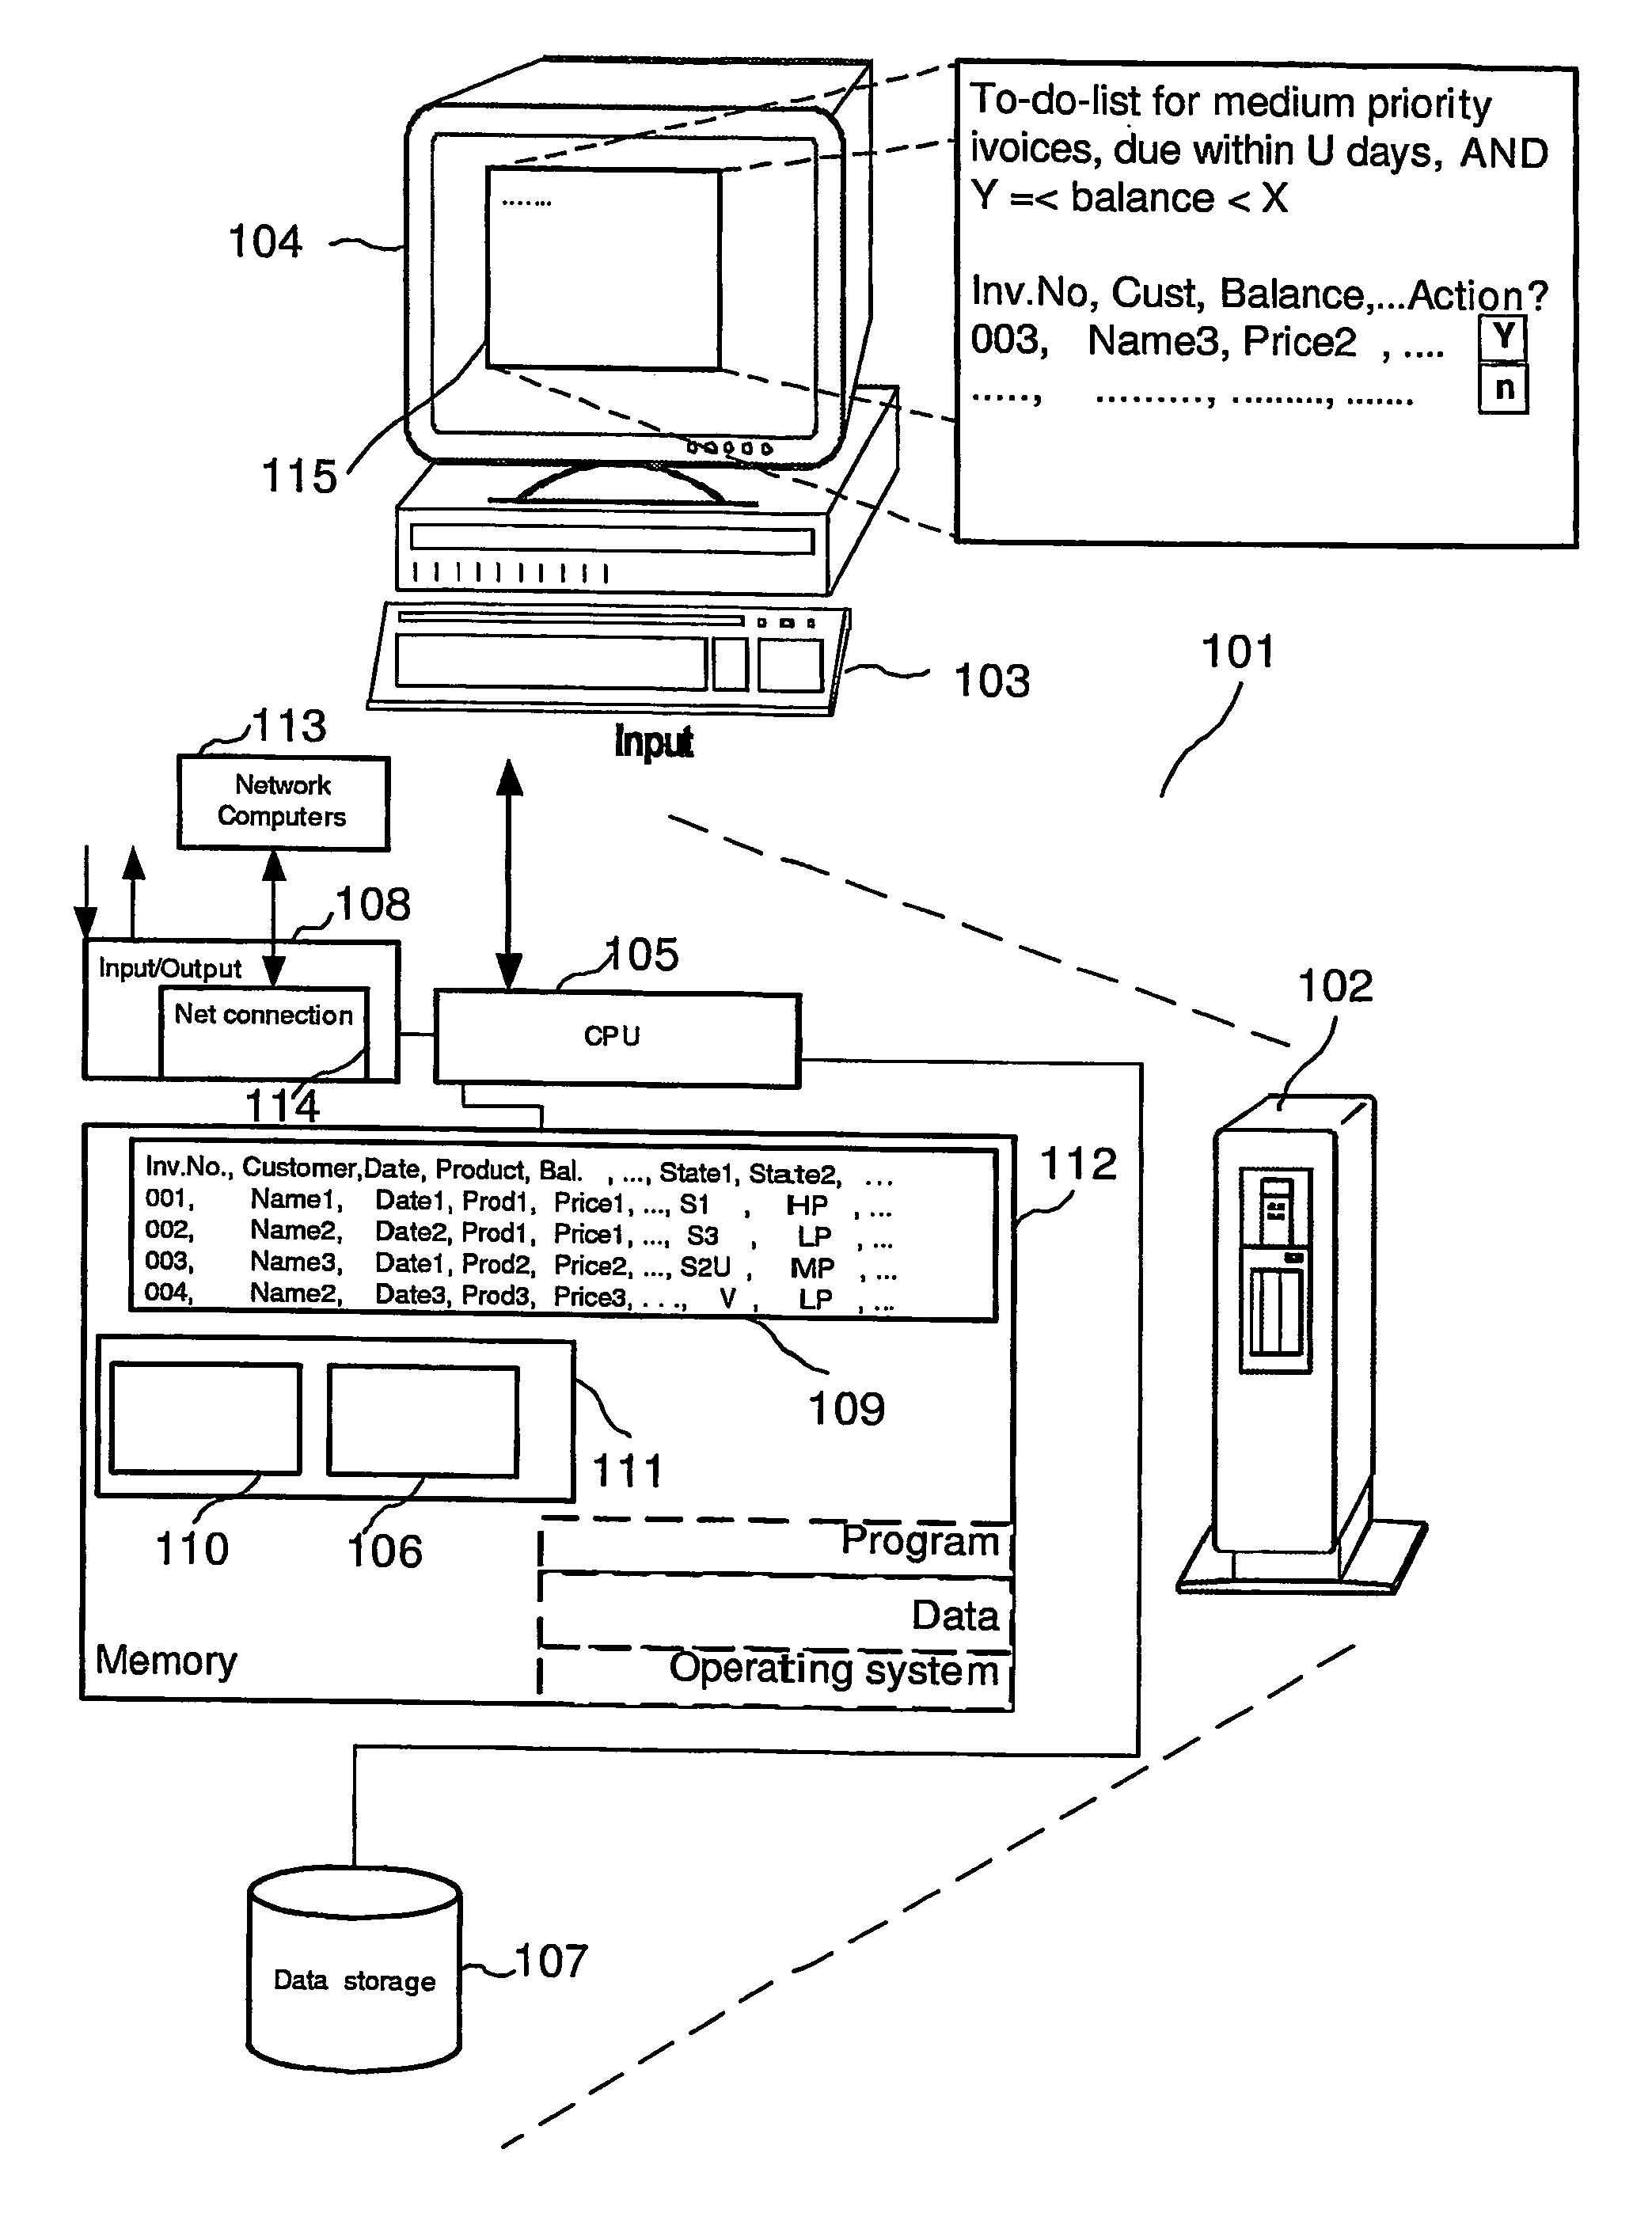 Method and software application for computer aided cutomer independent cash collection using a state field in a data record